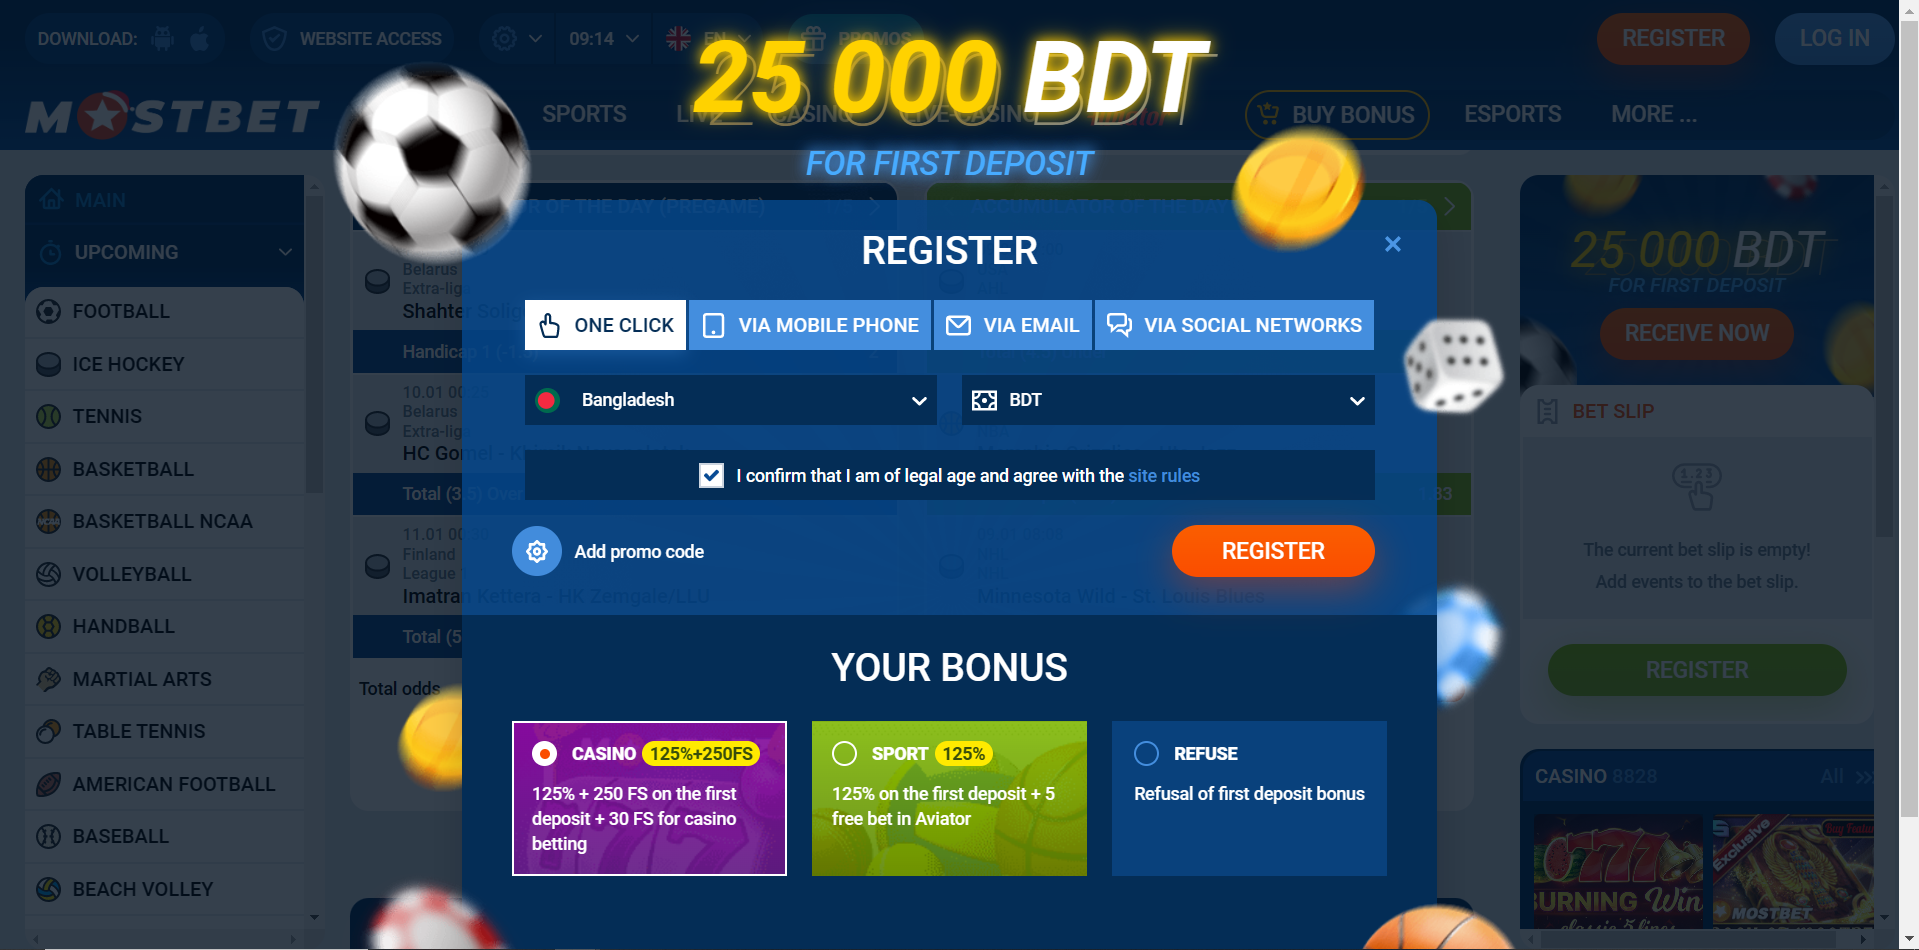 The Mostbet sign up  banner